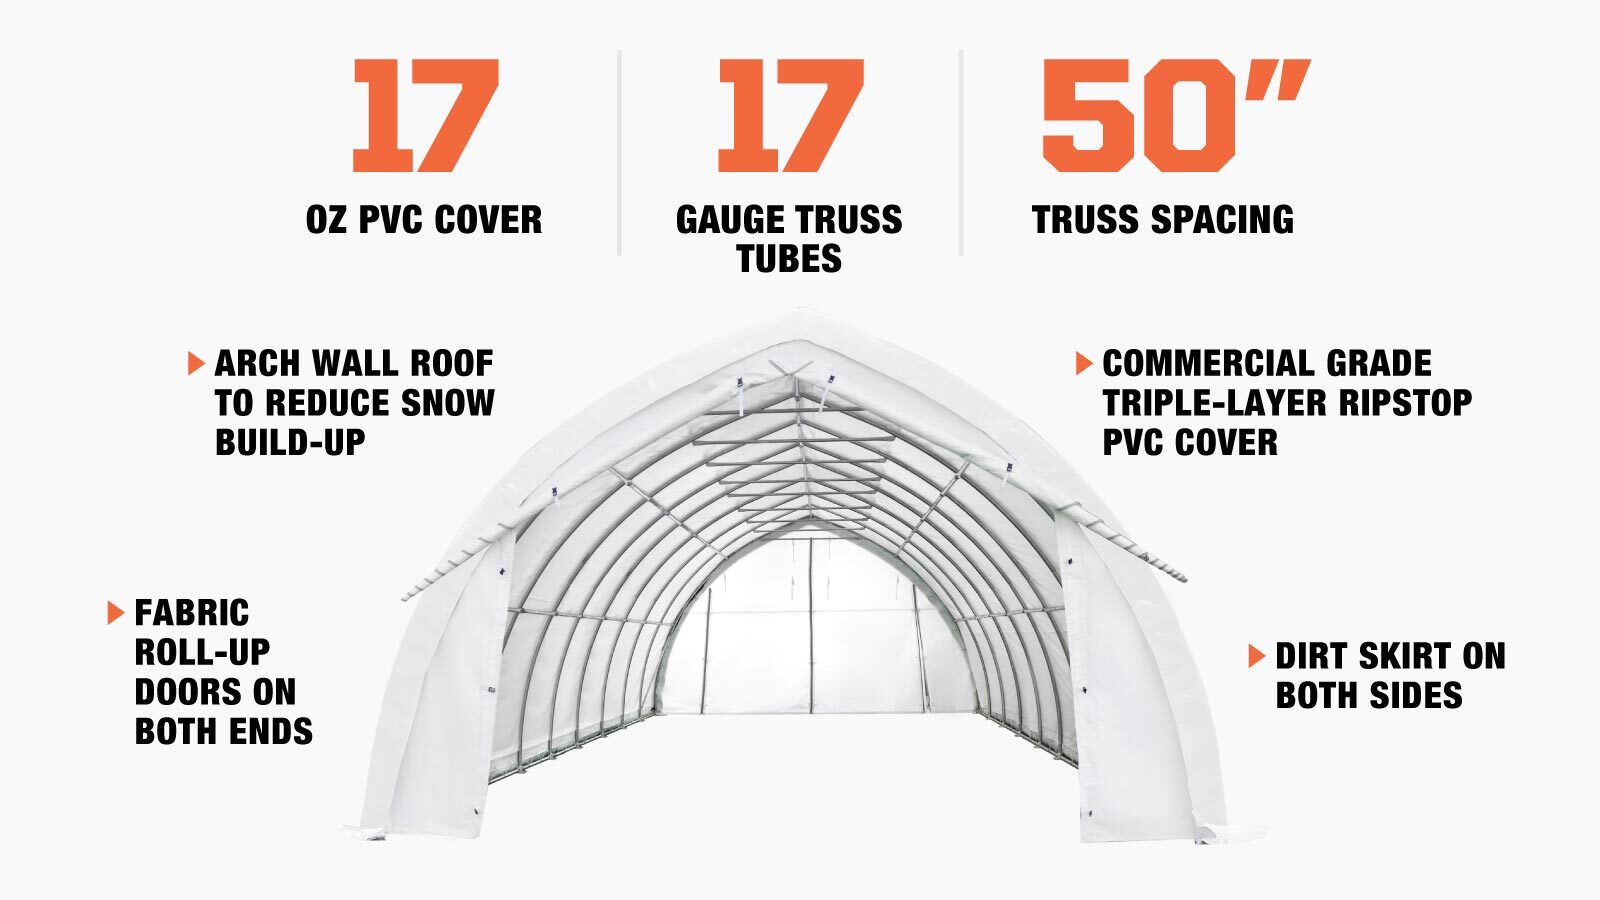 TMG Industrial 20' x 40' Arch Wall Peak Ceiling Storage Shelter with Heavy Duty 17 oz PVC Cover & Drive Through Doors, TMG-ST2041PV(Previously(ST2040PV)-description-image